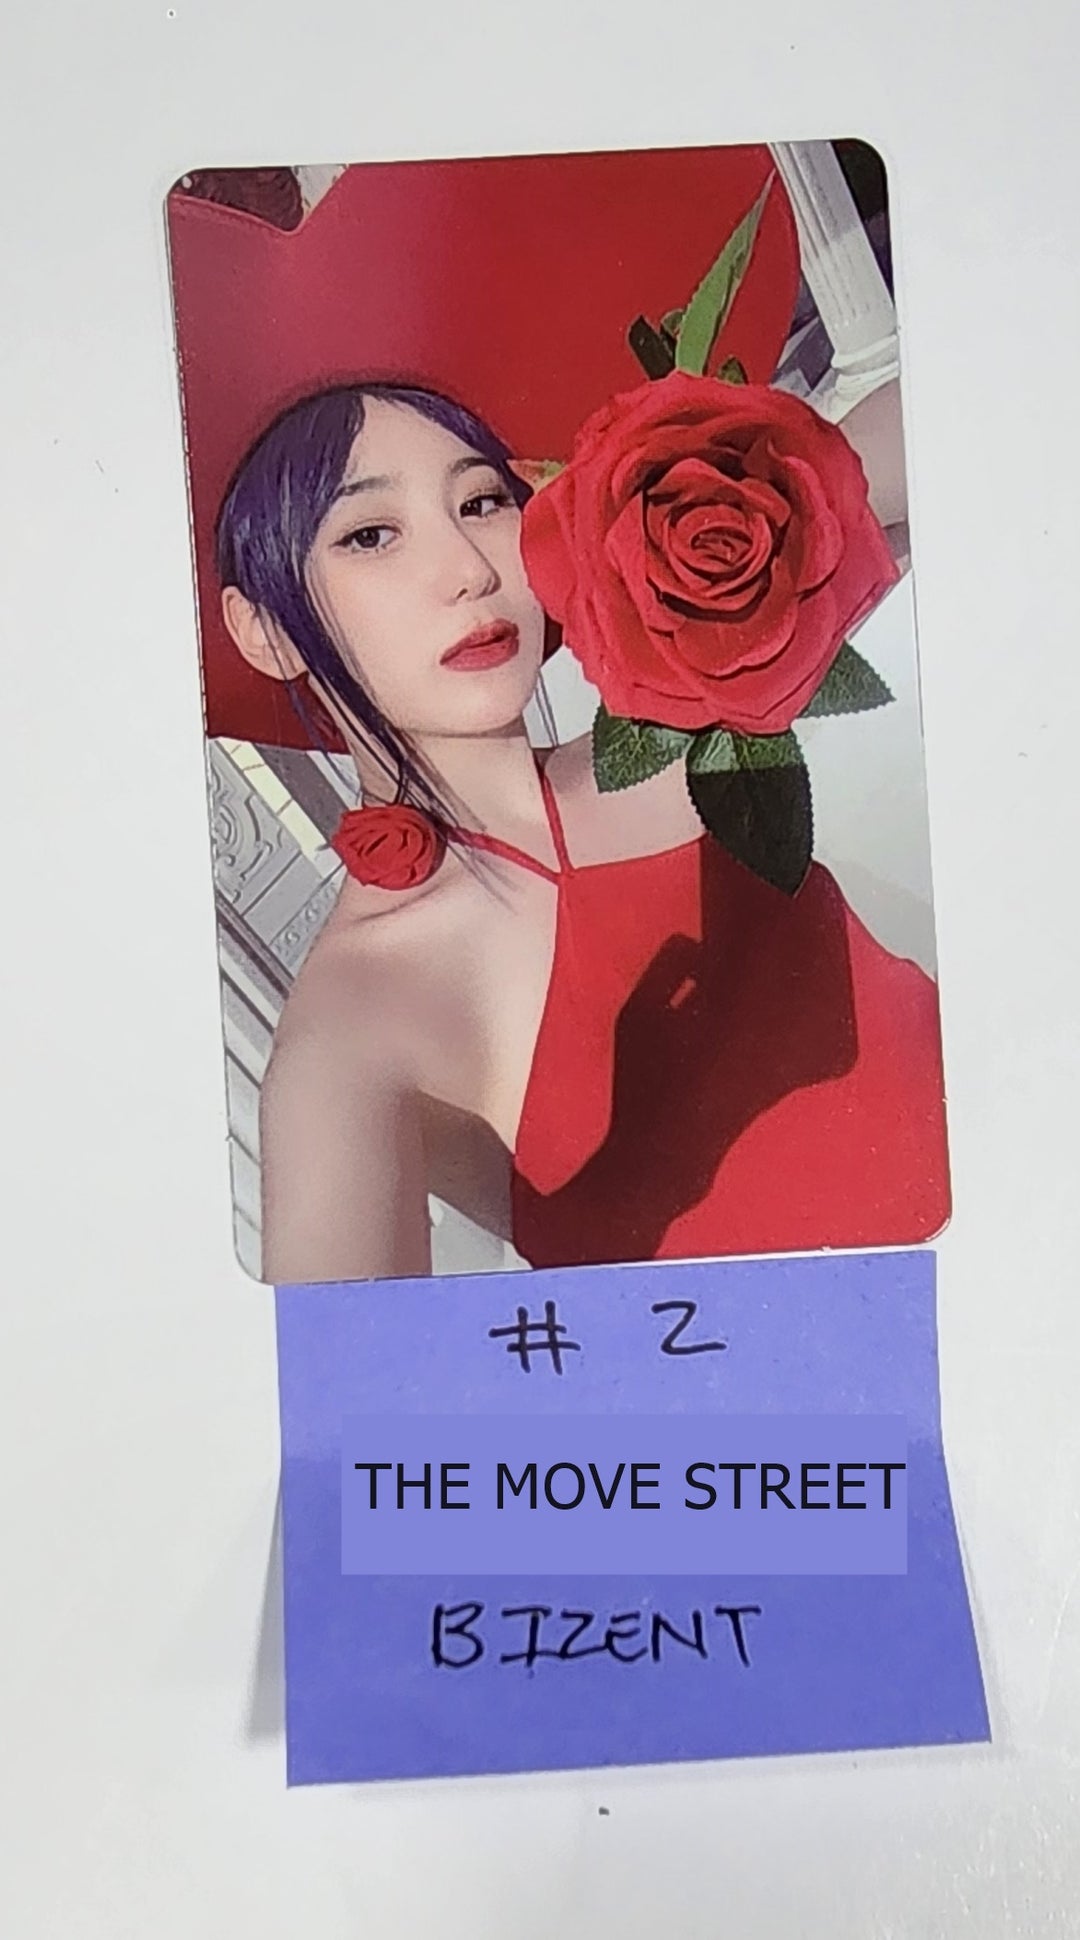 Lee Chae Yeon "The Move Street" - Bizent Mall Pre-Order Benefit Photocard [Poca Ver] [23.09.08]